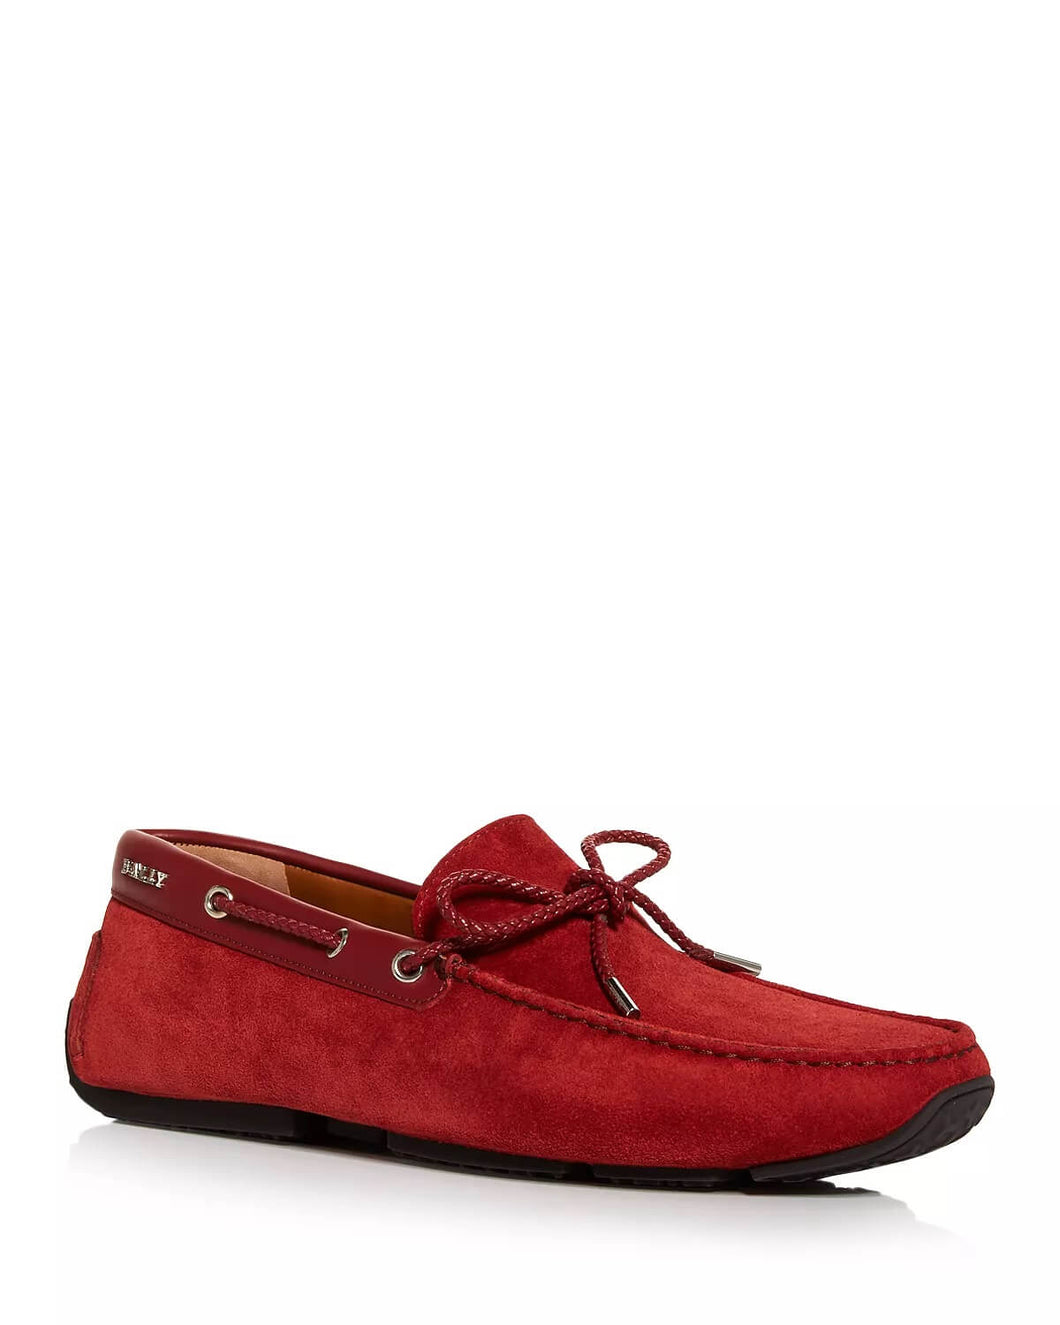 NEW Bally Pindar Men's 6231347 Red Leather Suede Drivers US 10.5 MSRP $475